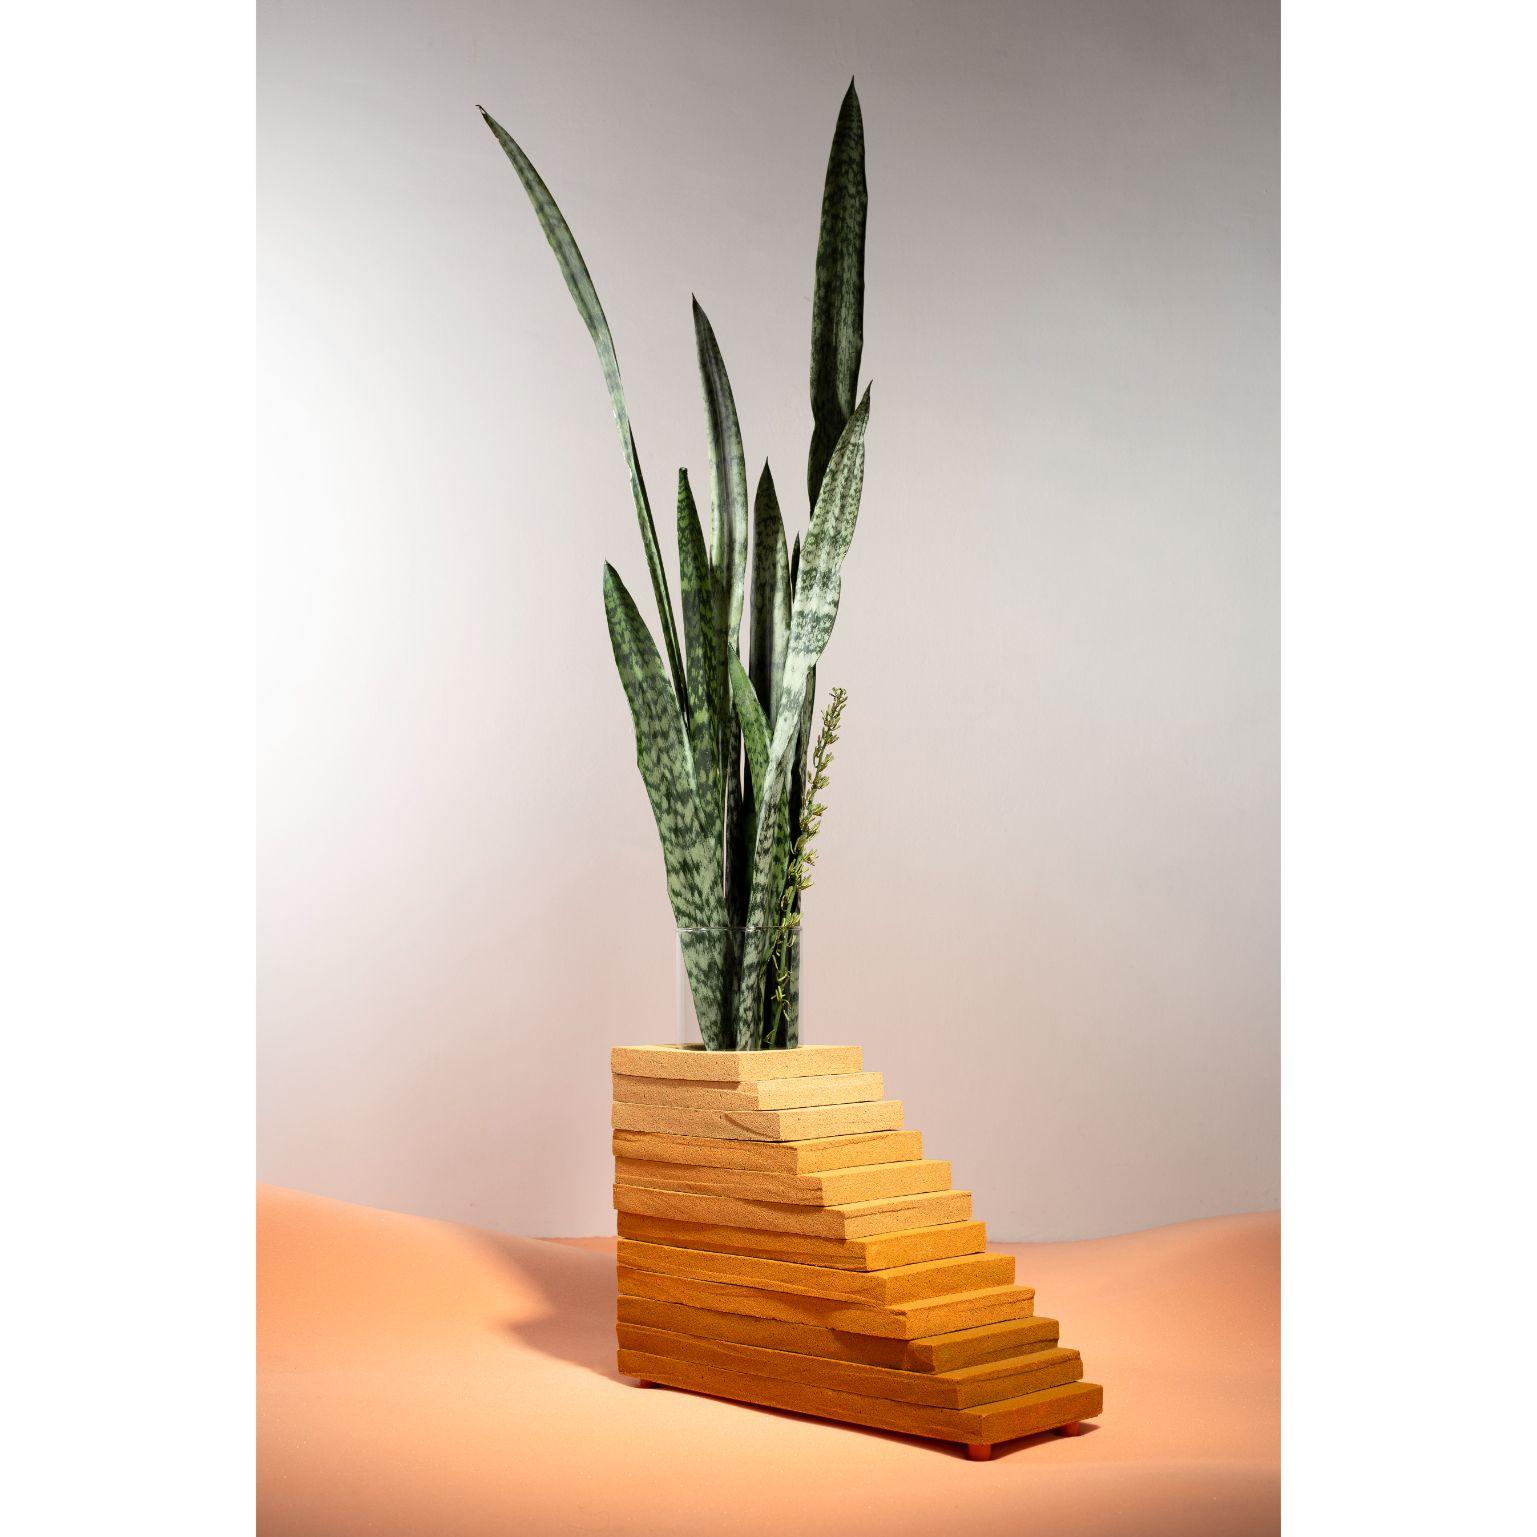 D33 - vase by Cultivado Em Casa
Dimensions: 20 x 63 x 53 cm
Materials: D33 foam, acrylic paint, acrylic resin, carbon steel.

Also Available: different colors

The D33 collection is intended to enhance foam, a material so present in furniture,